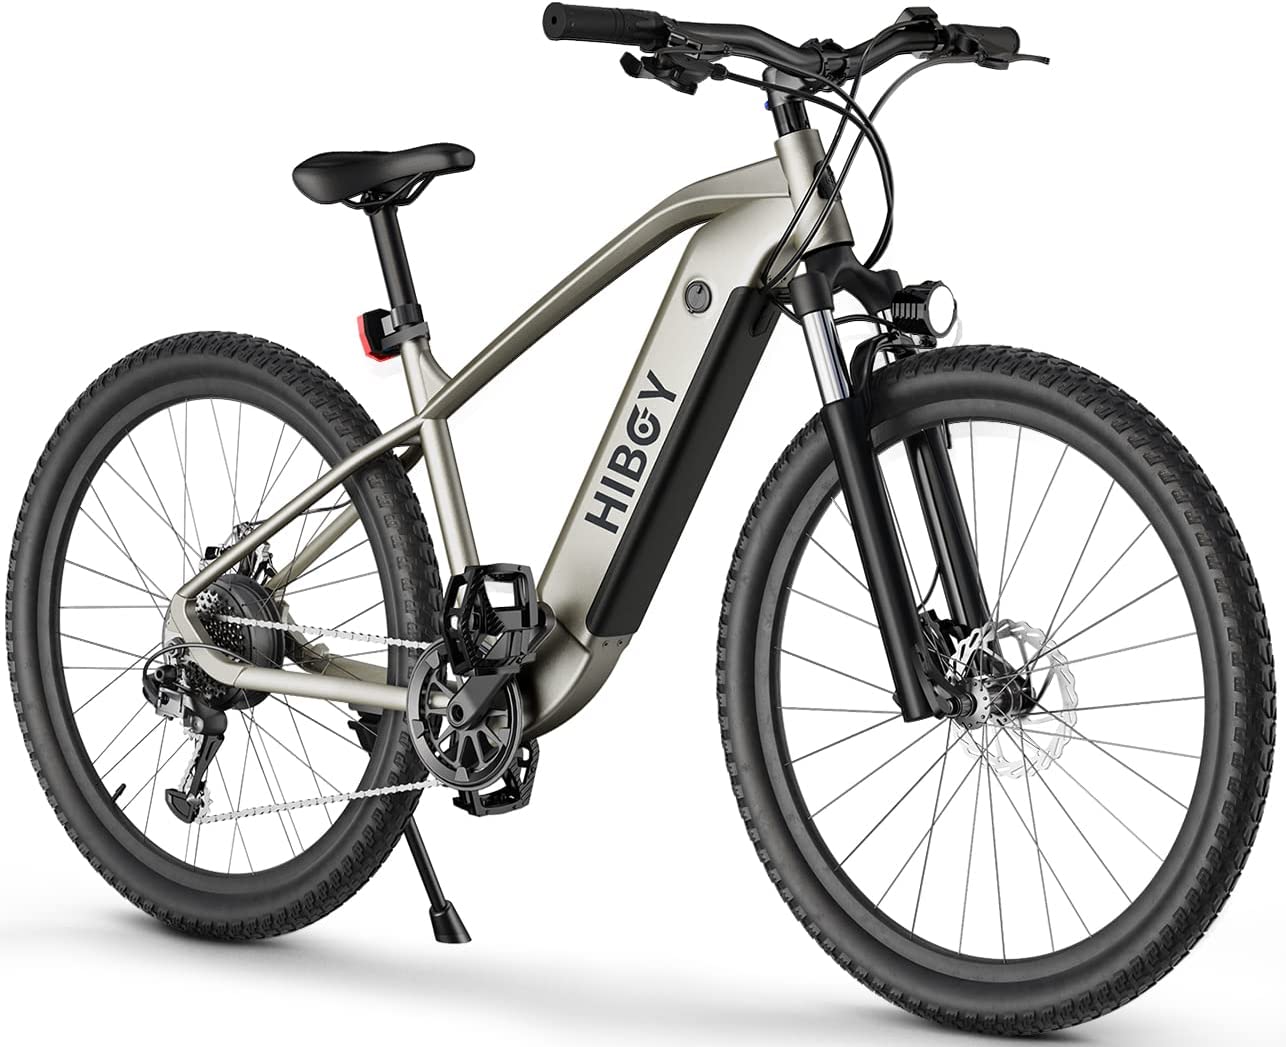 Hiboy P7 Commuter Electric Bike for Adults